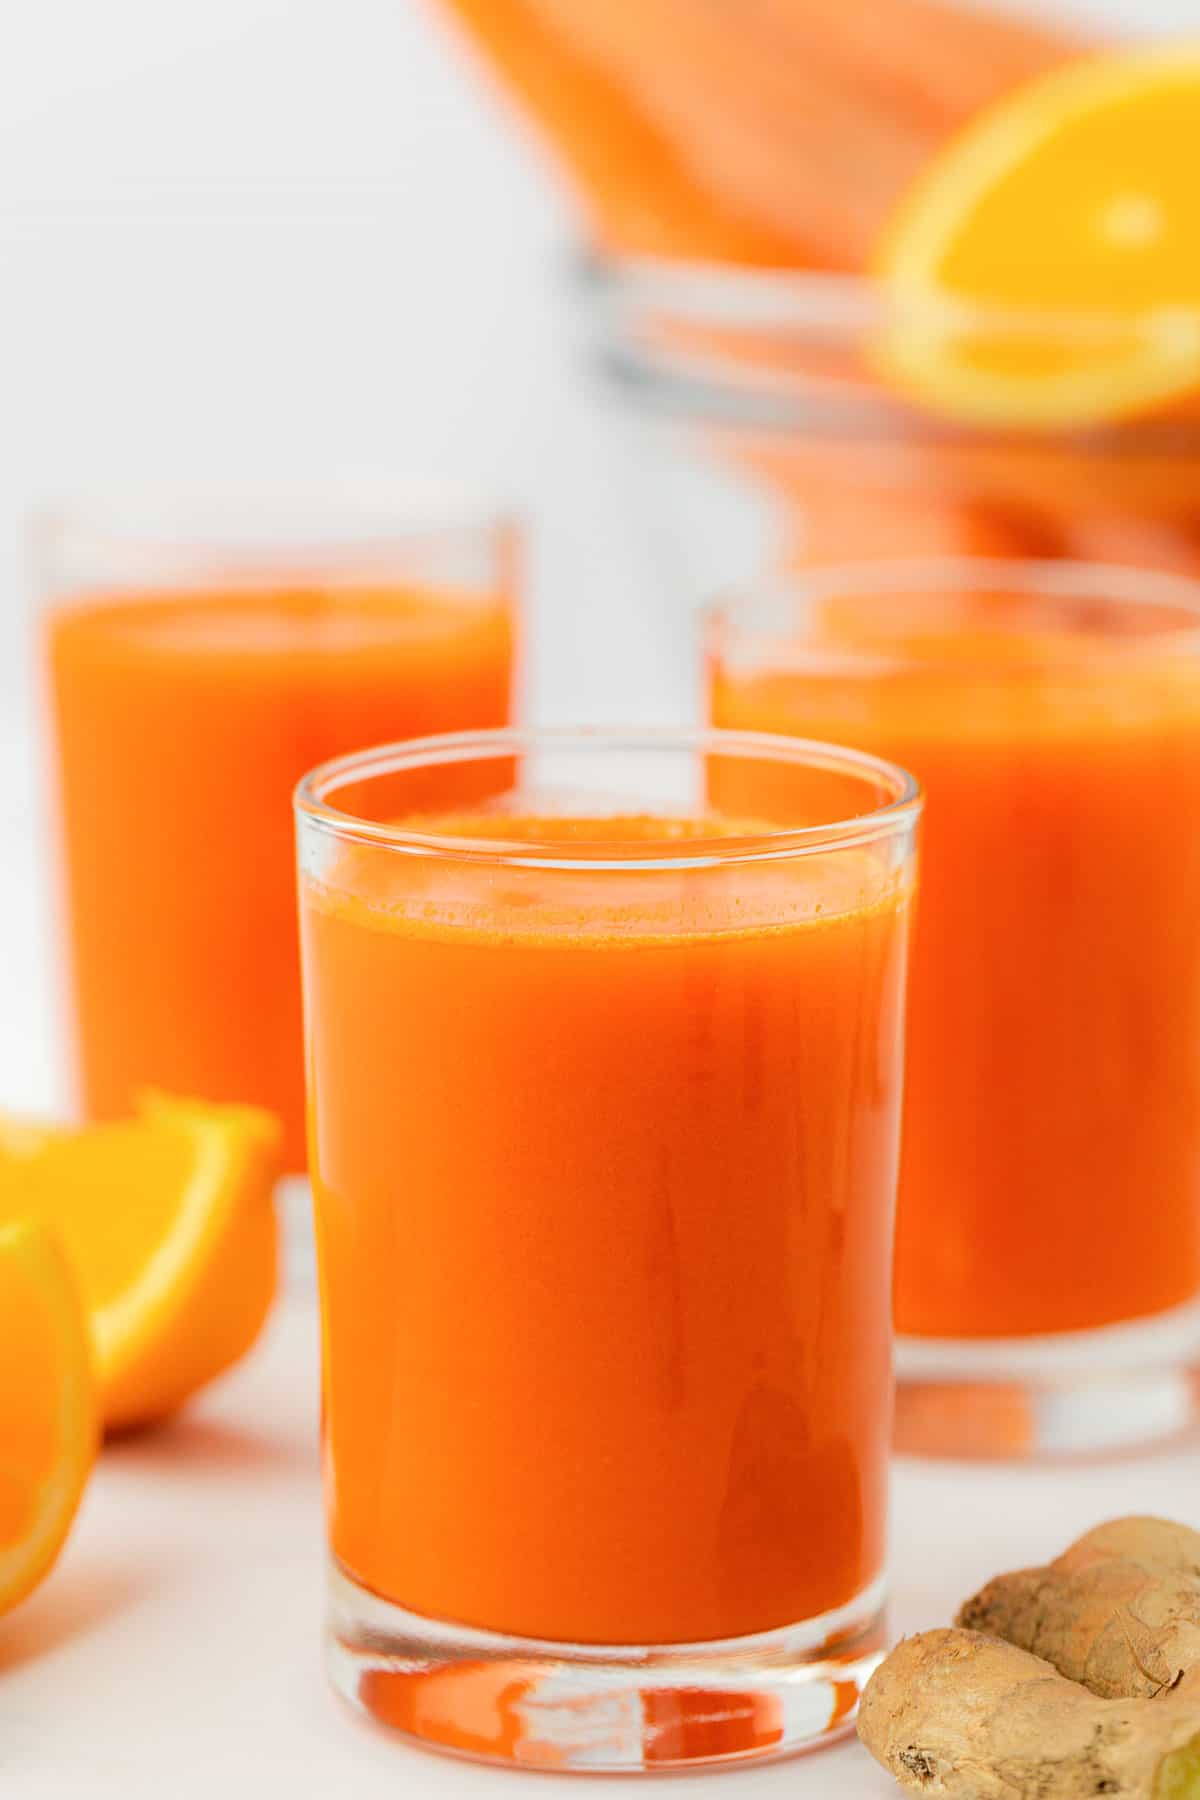 carrot juice in a glass